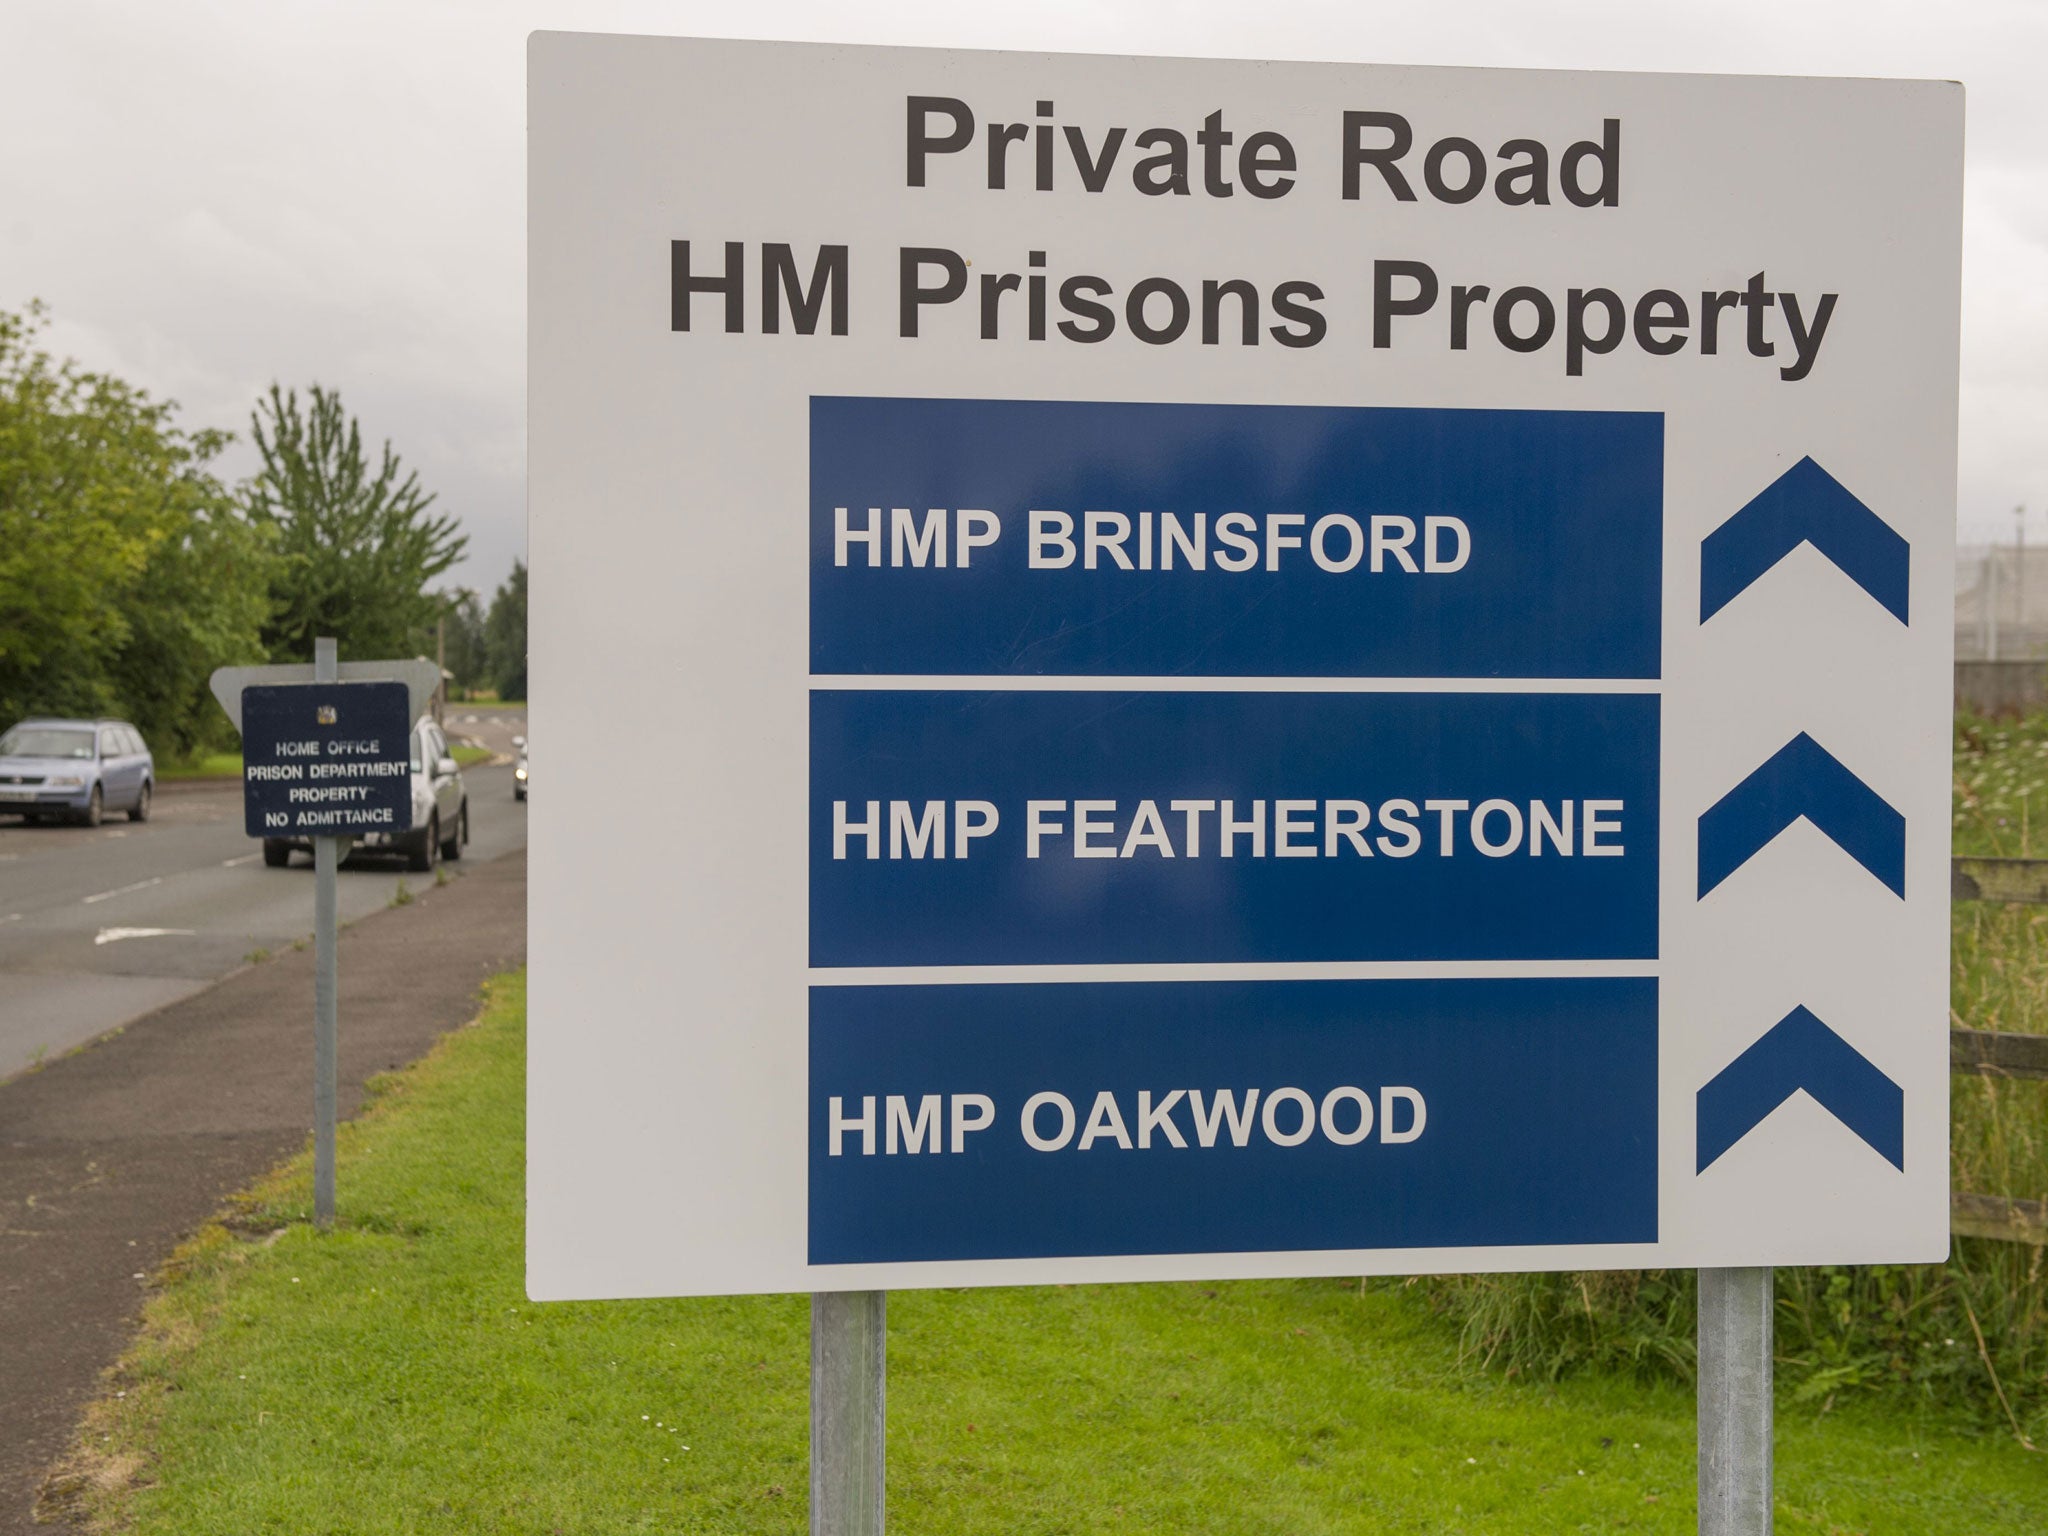 Road sign to the entrance of HMP Featherstone, HMP Brinsford and HMP Oakwood; a nine-hour disturbance at Oakwood prison has been described as a 'full scale riot'